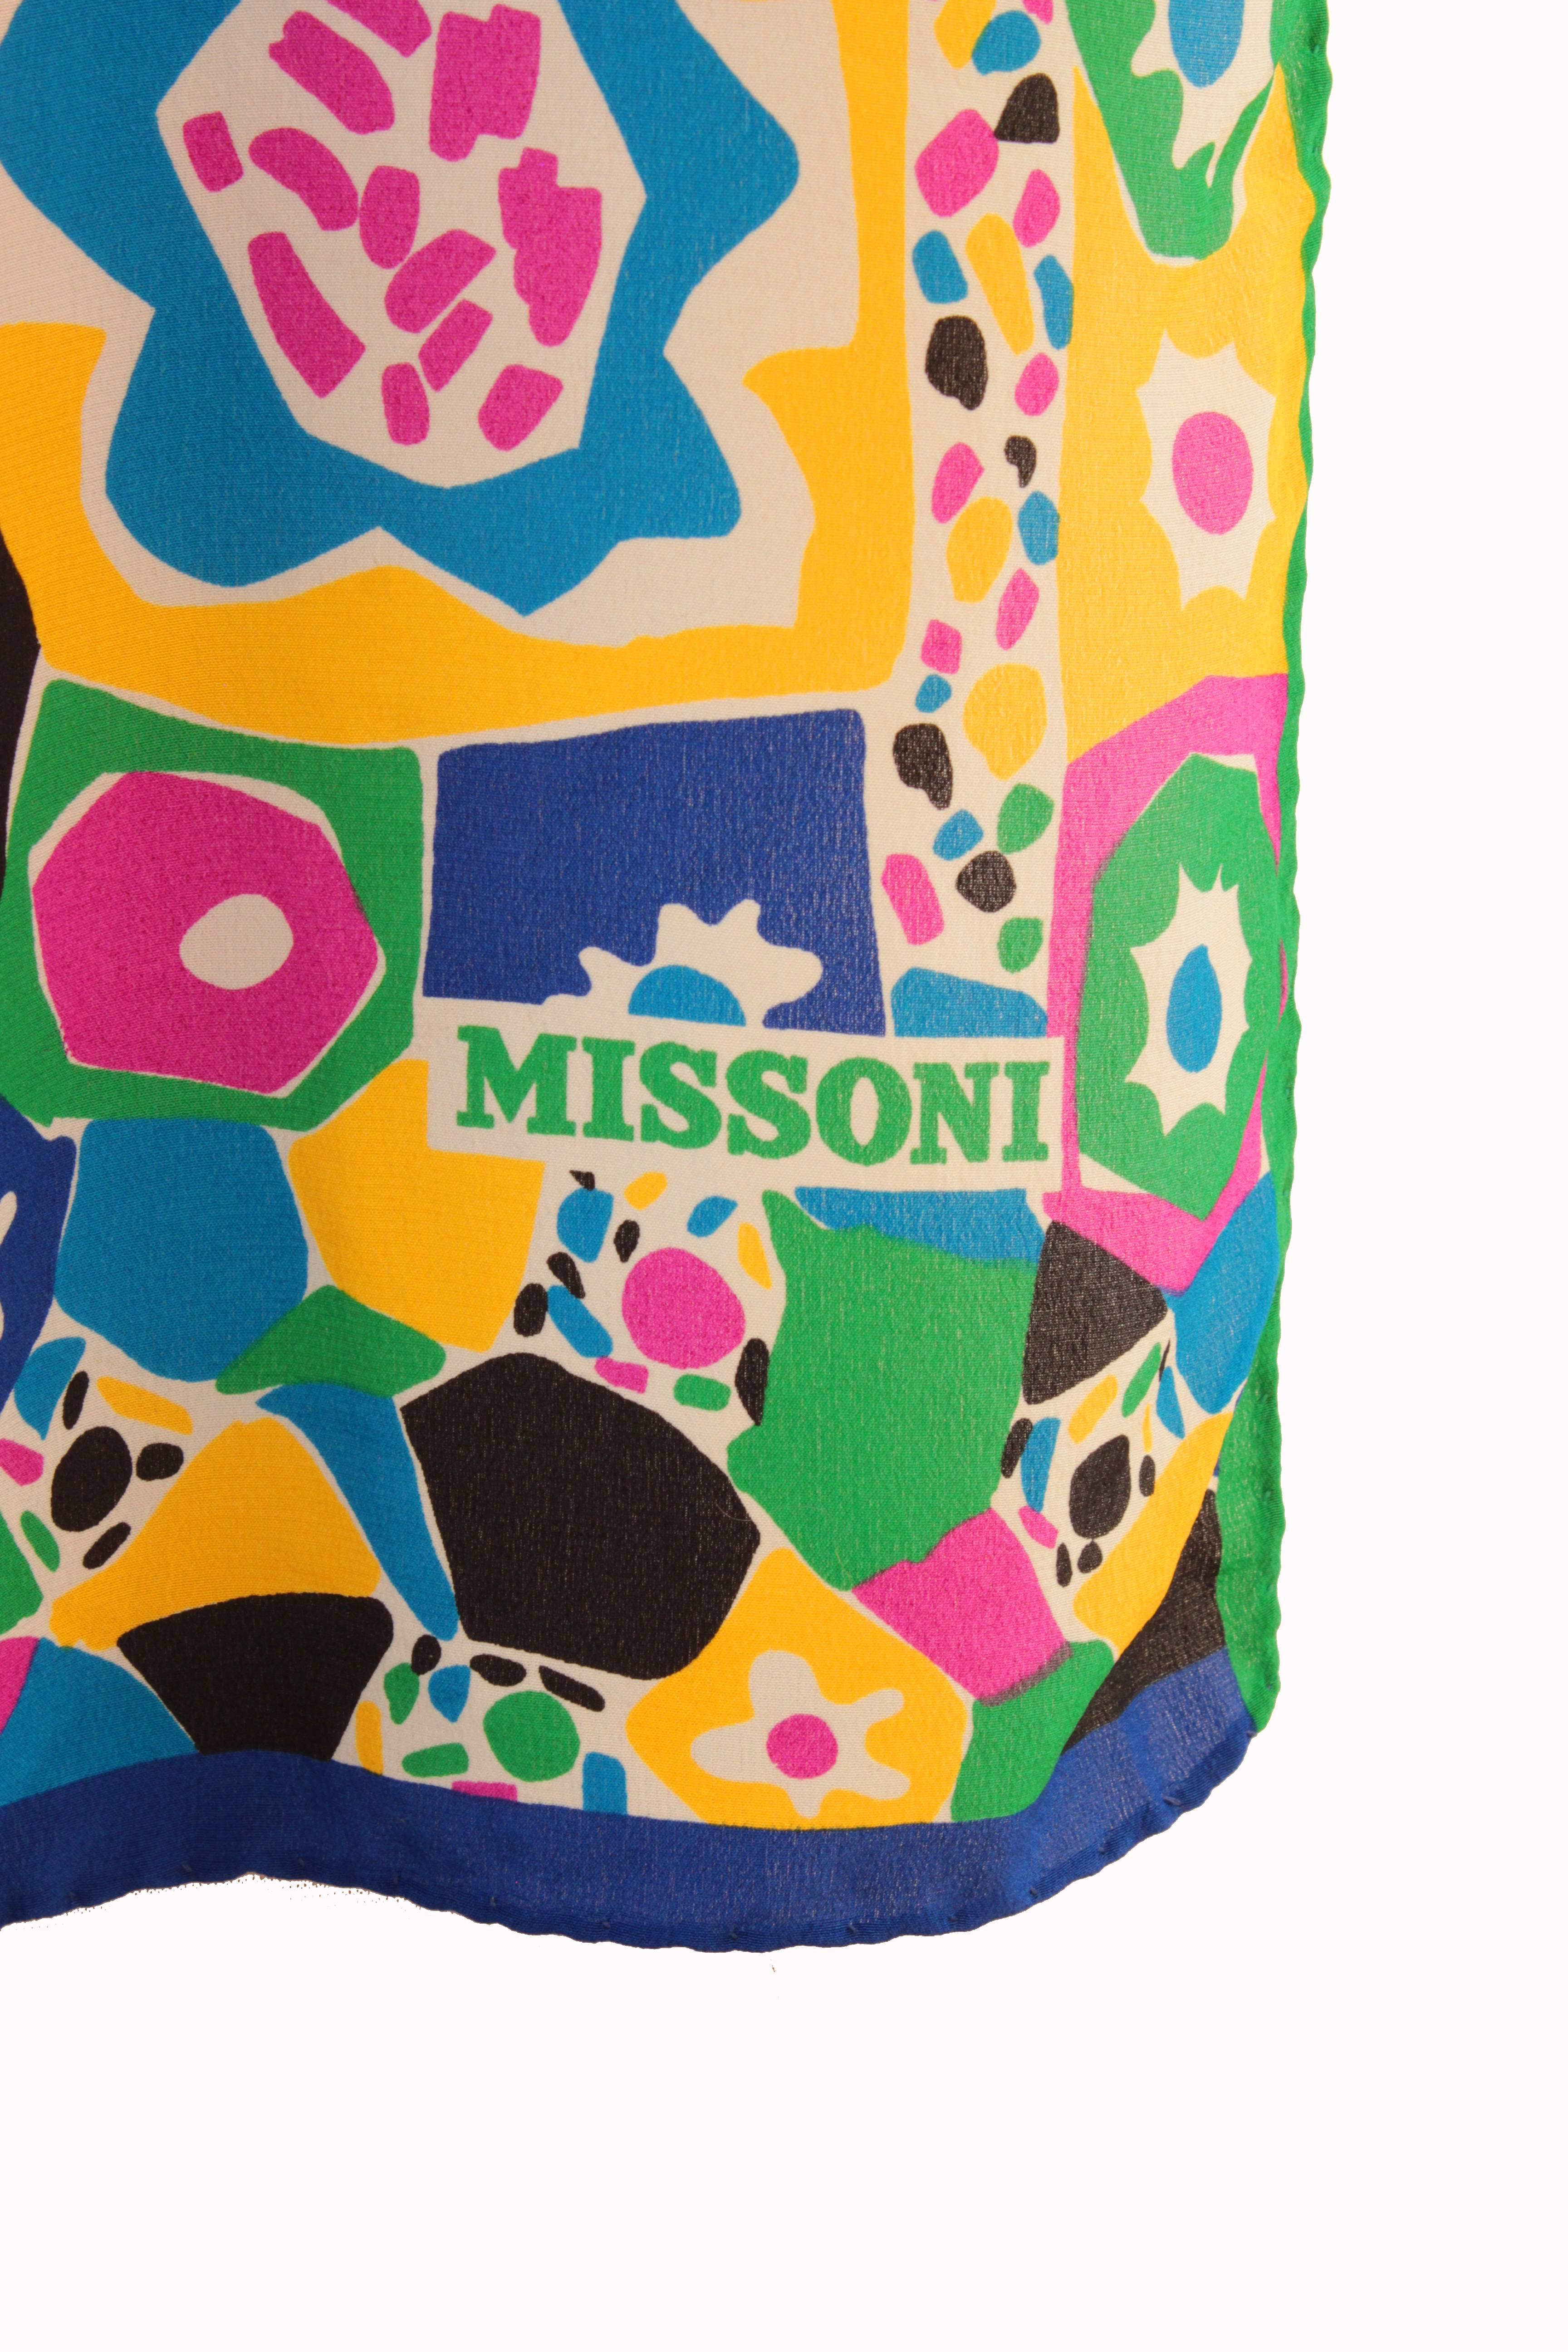 Women's or Men's Missoni Silk Scarf with Colorful Pop Art Flowers 62in x 12in Rare Print 1990s 